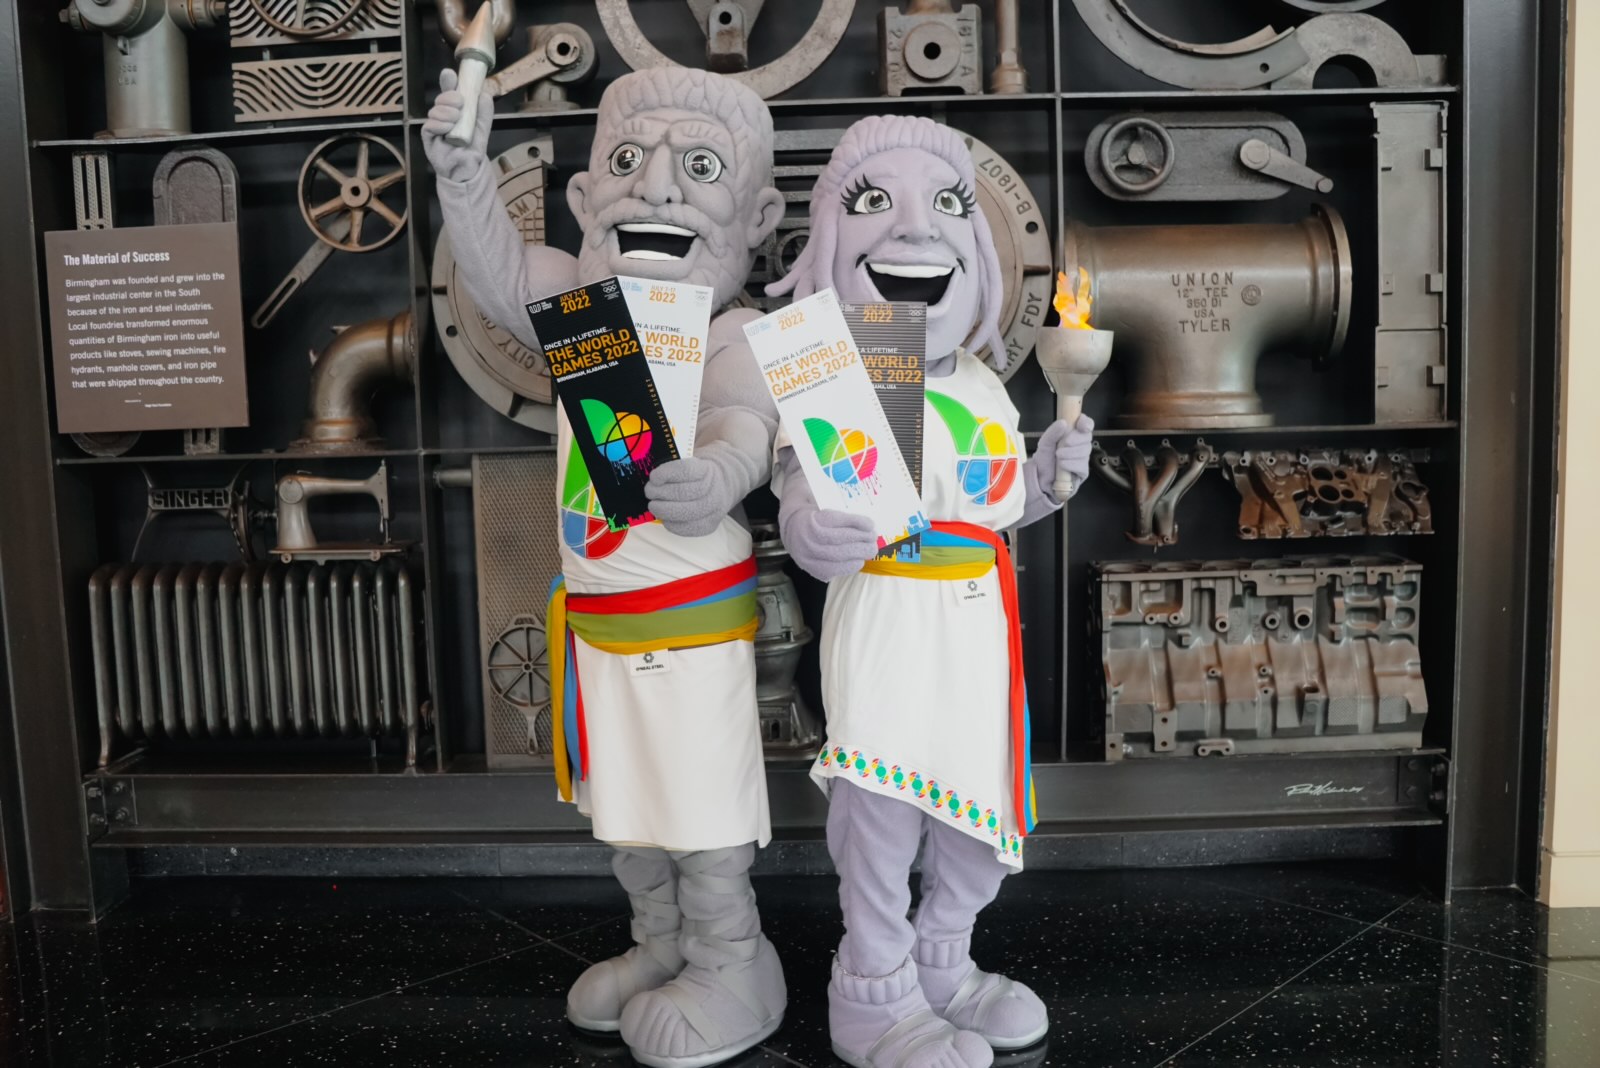 Vulcan and Vesta pose with tickets to The World Games 2022